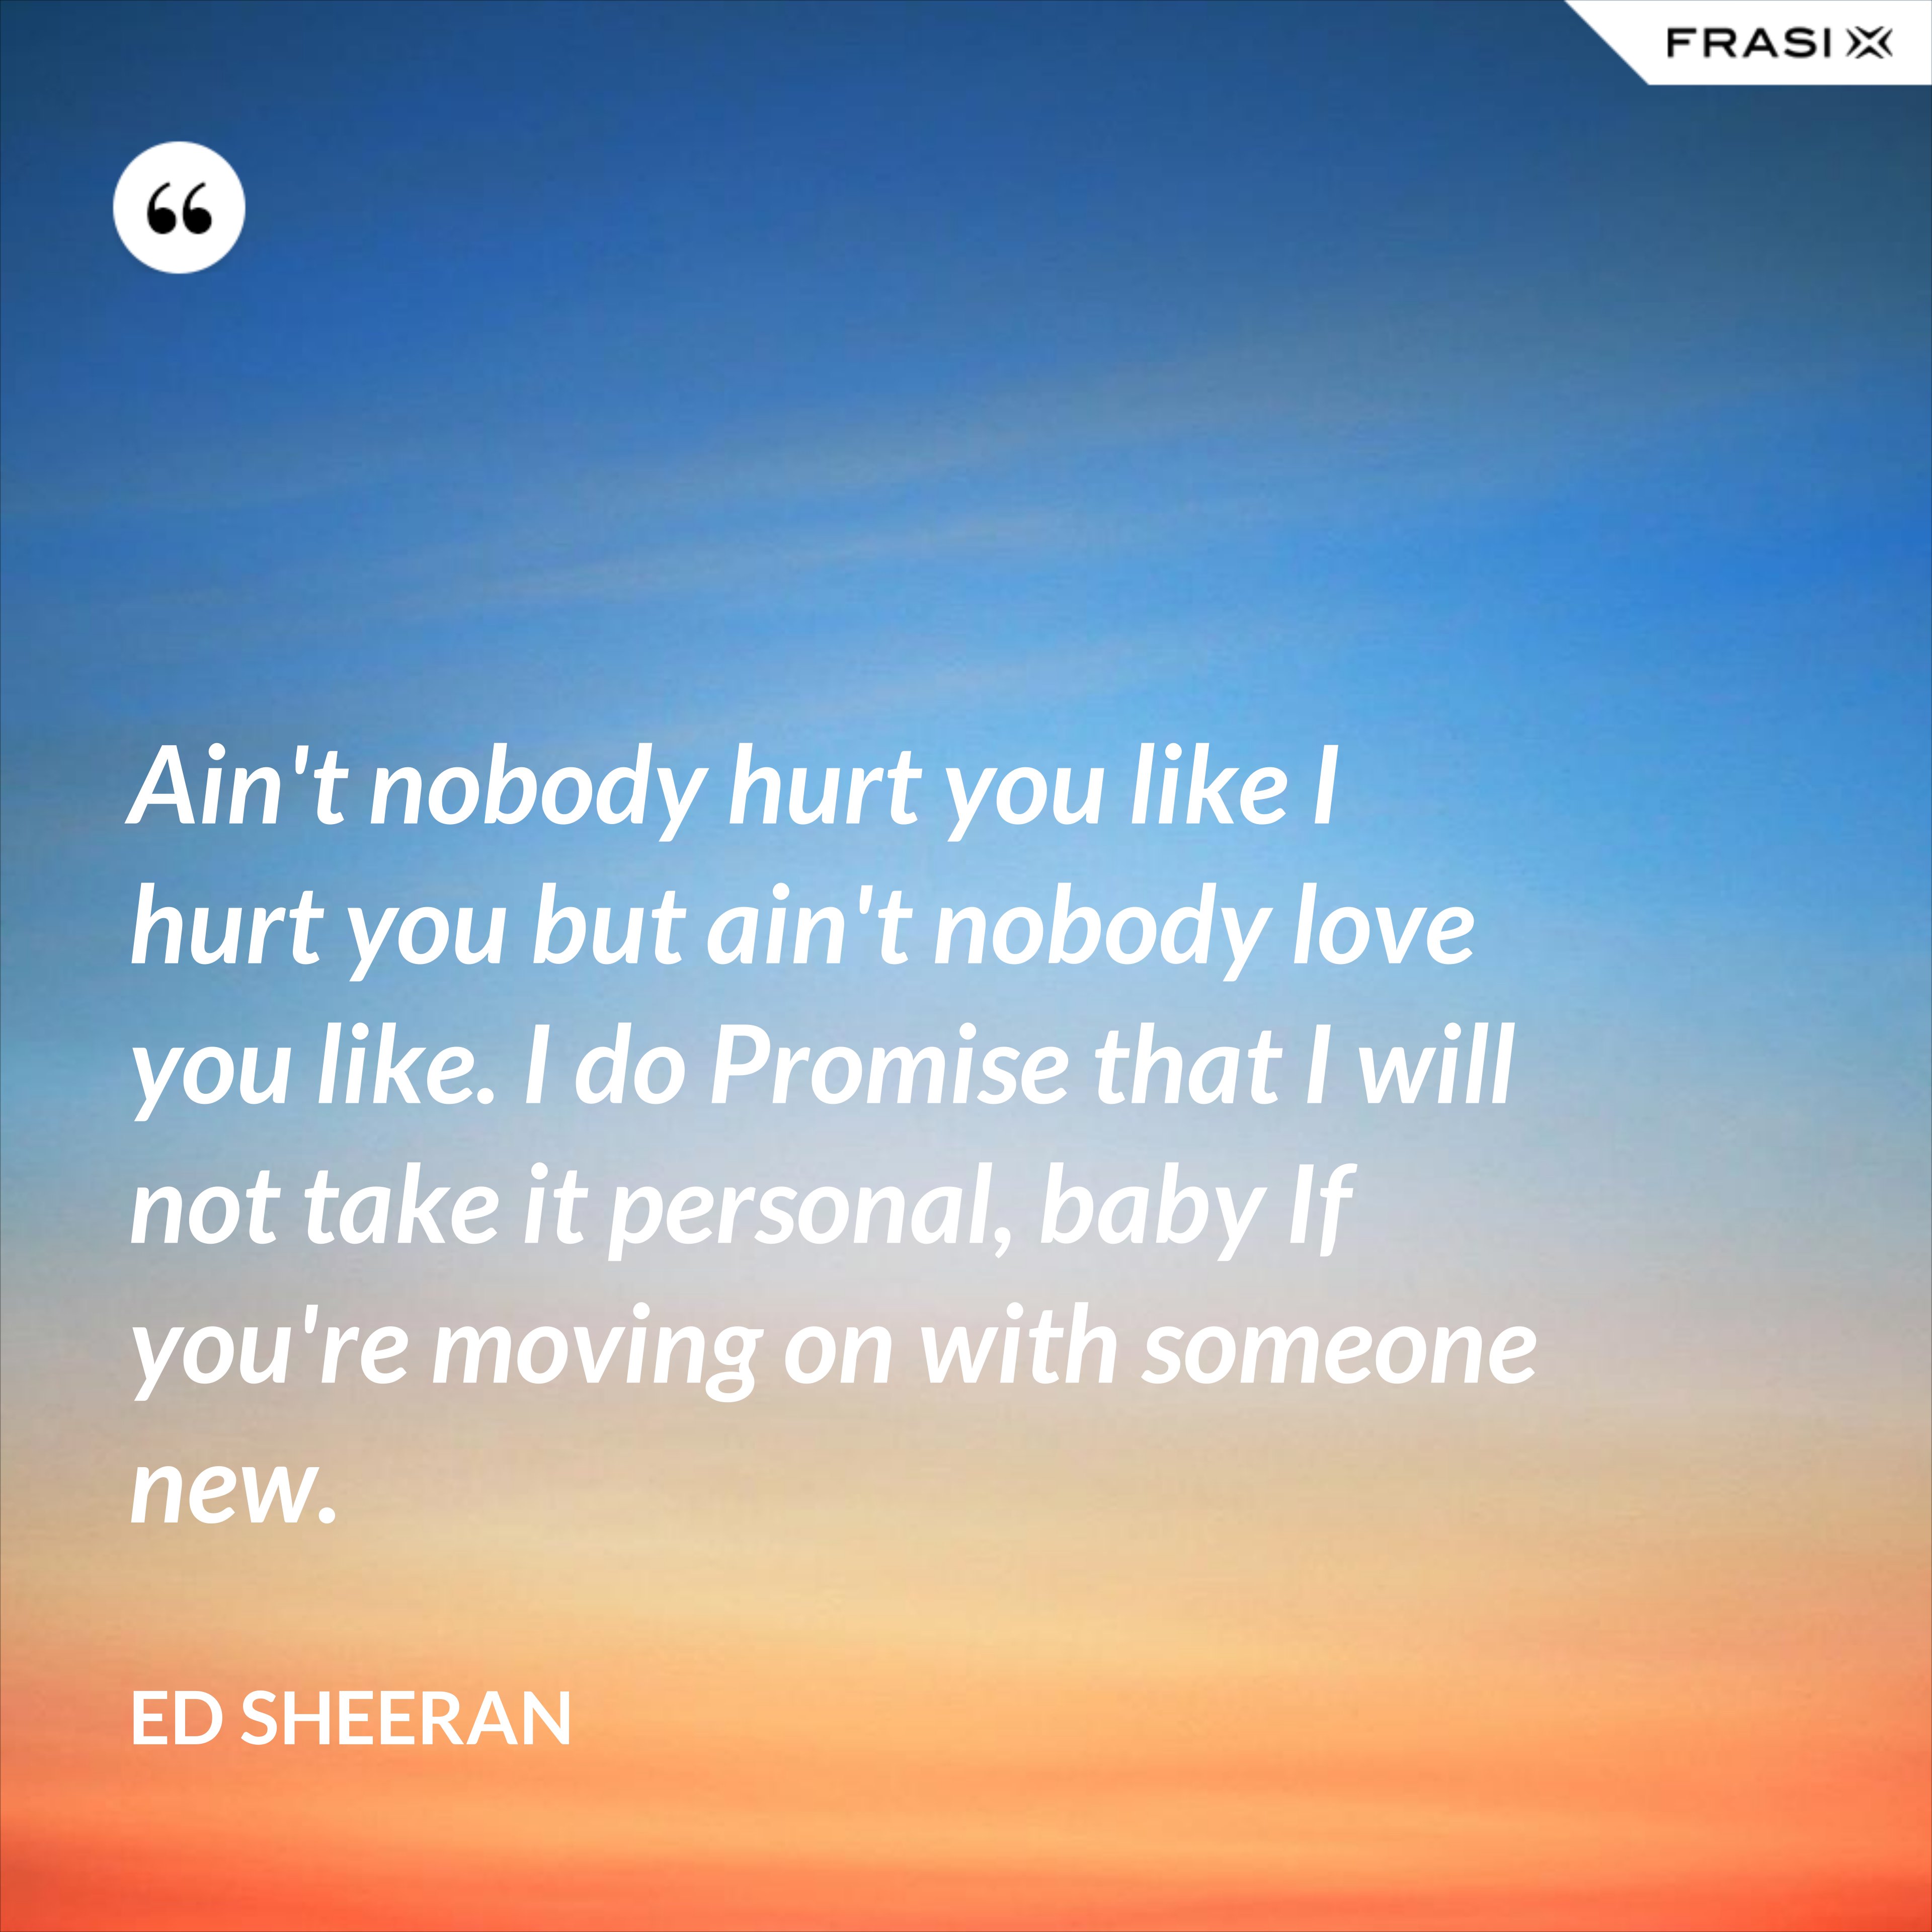 Ain't nobody hurt you like I hurt you but ain't nobody love you like. I do Promise that I will not take it personal, baby If you're moving on with someone new. - Ed Sheeran